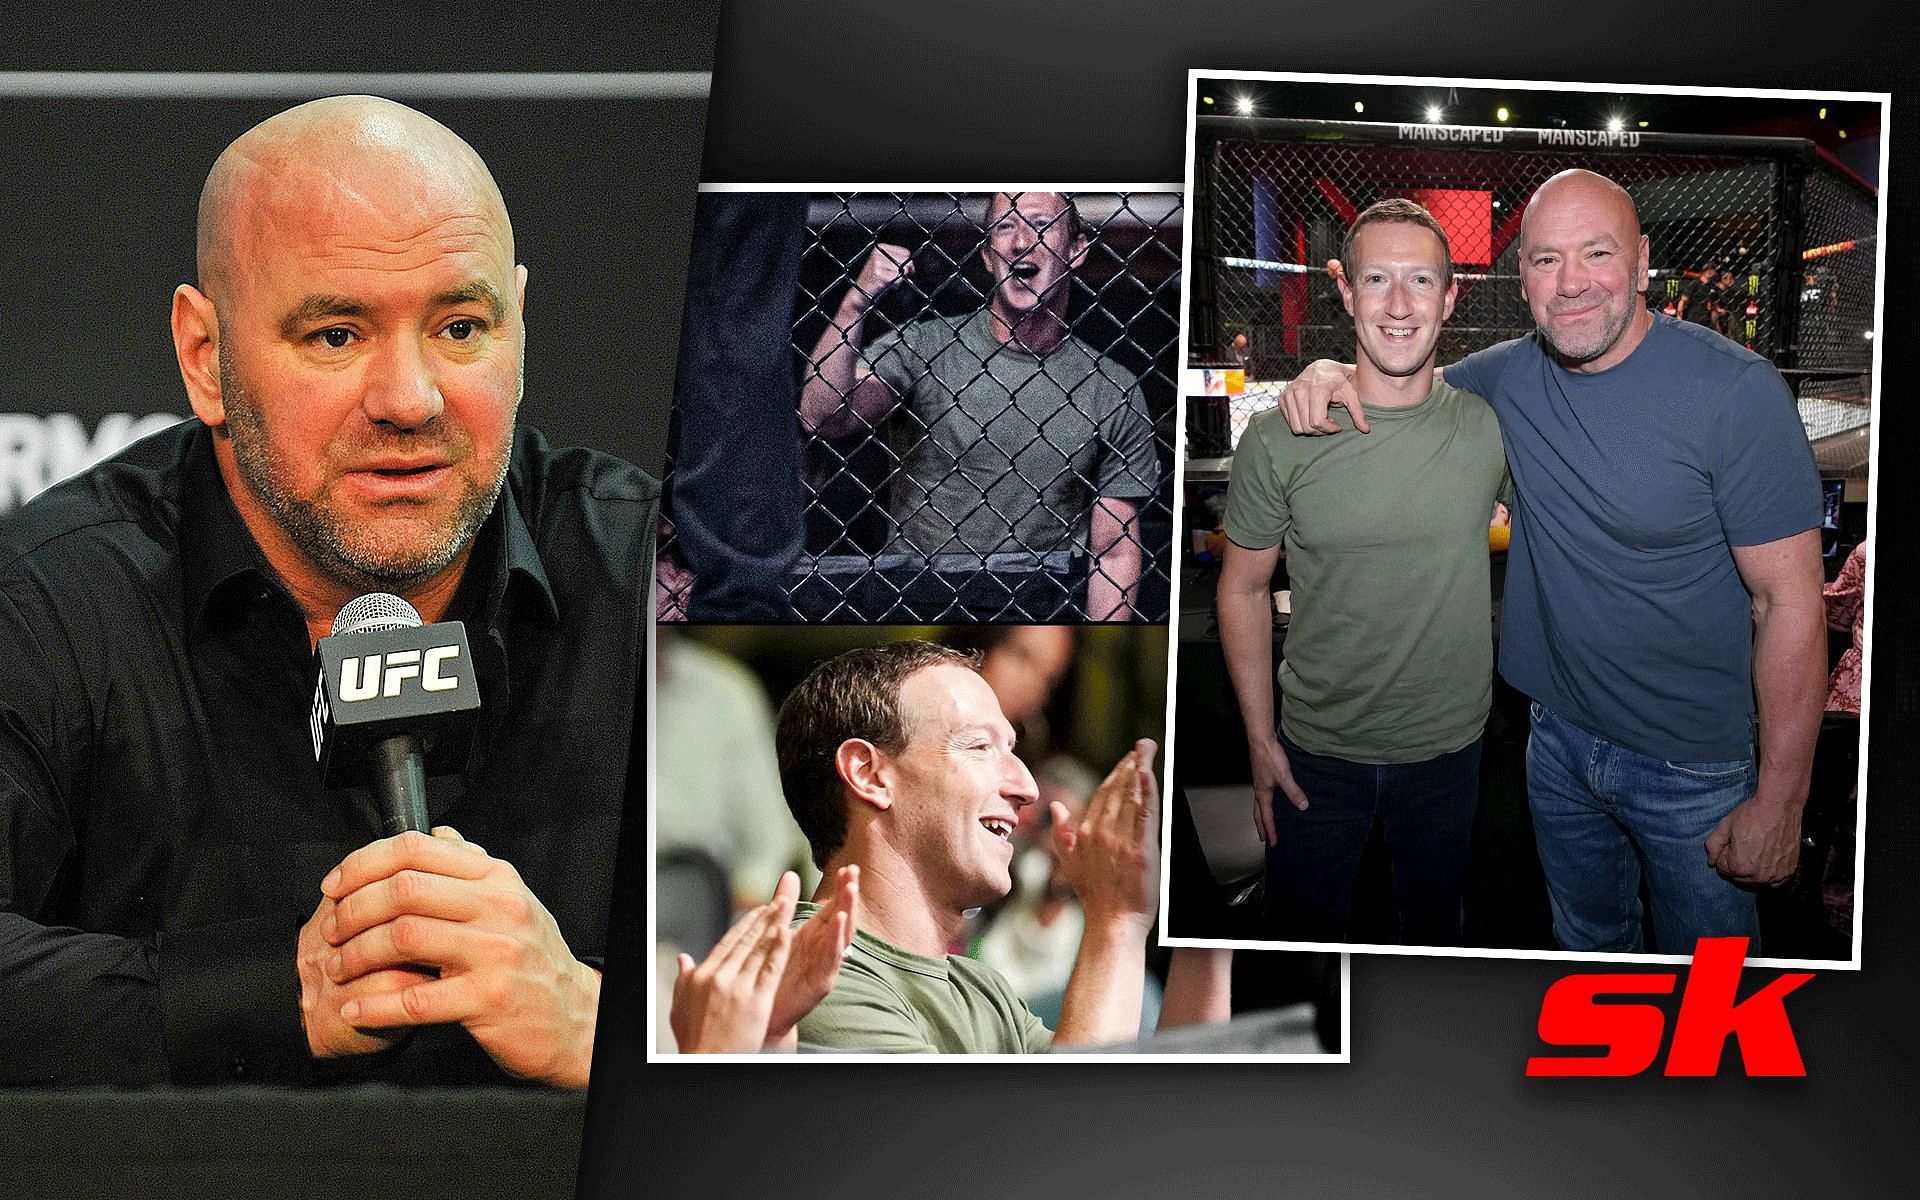 Dana White (left), Mark Zuckerberg (center), and the two posing together (right). [Images courtesy: left image from Getty Images, center image from Instagram @espnmma, and right image from Instagram @ufc]